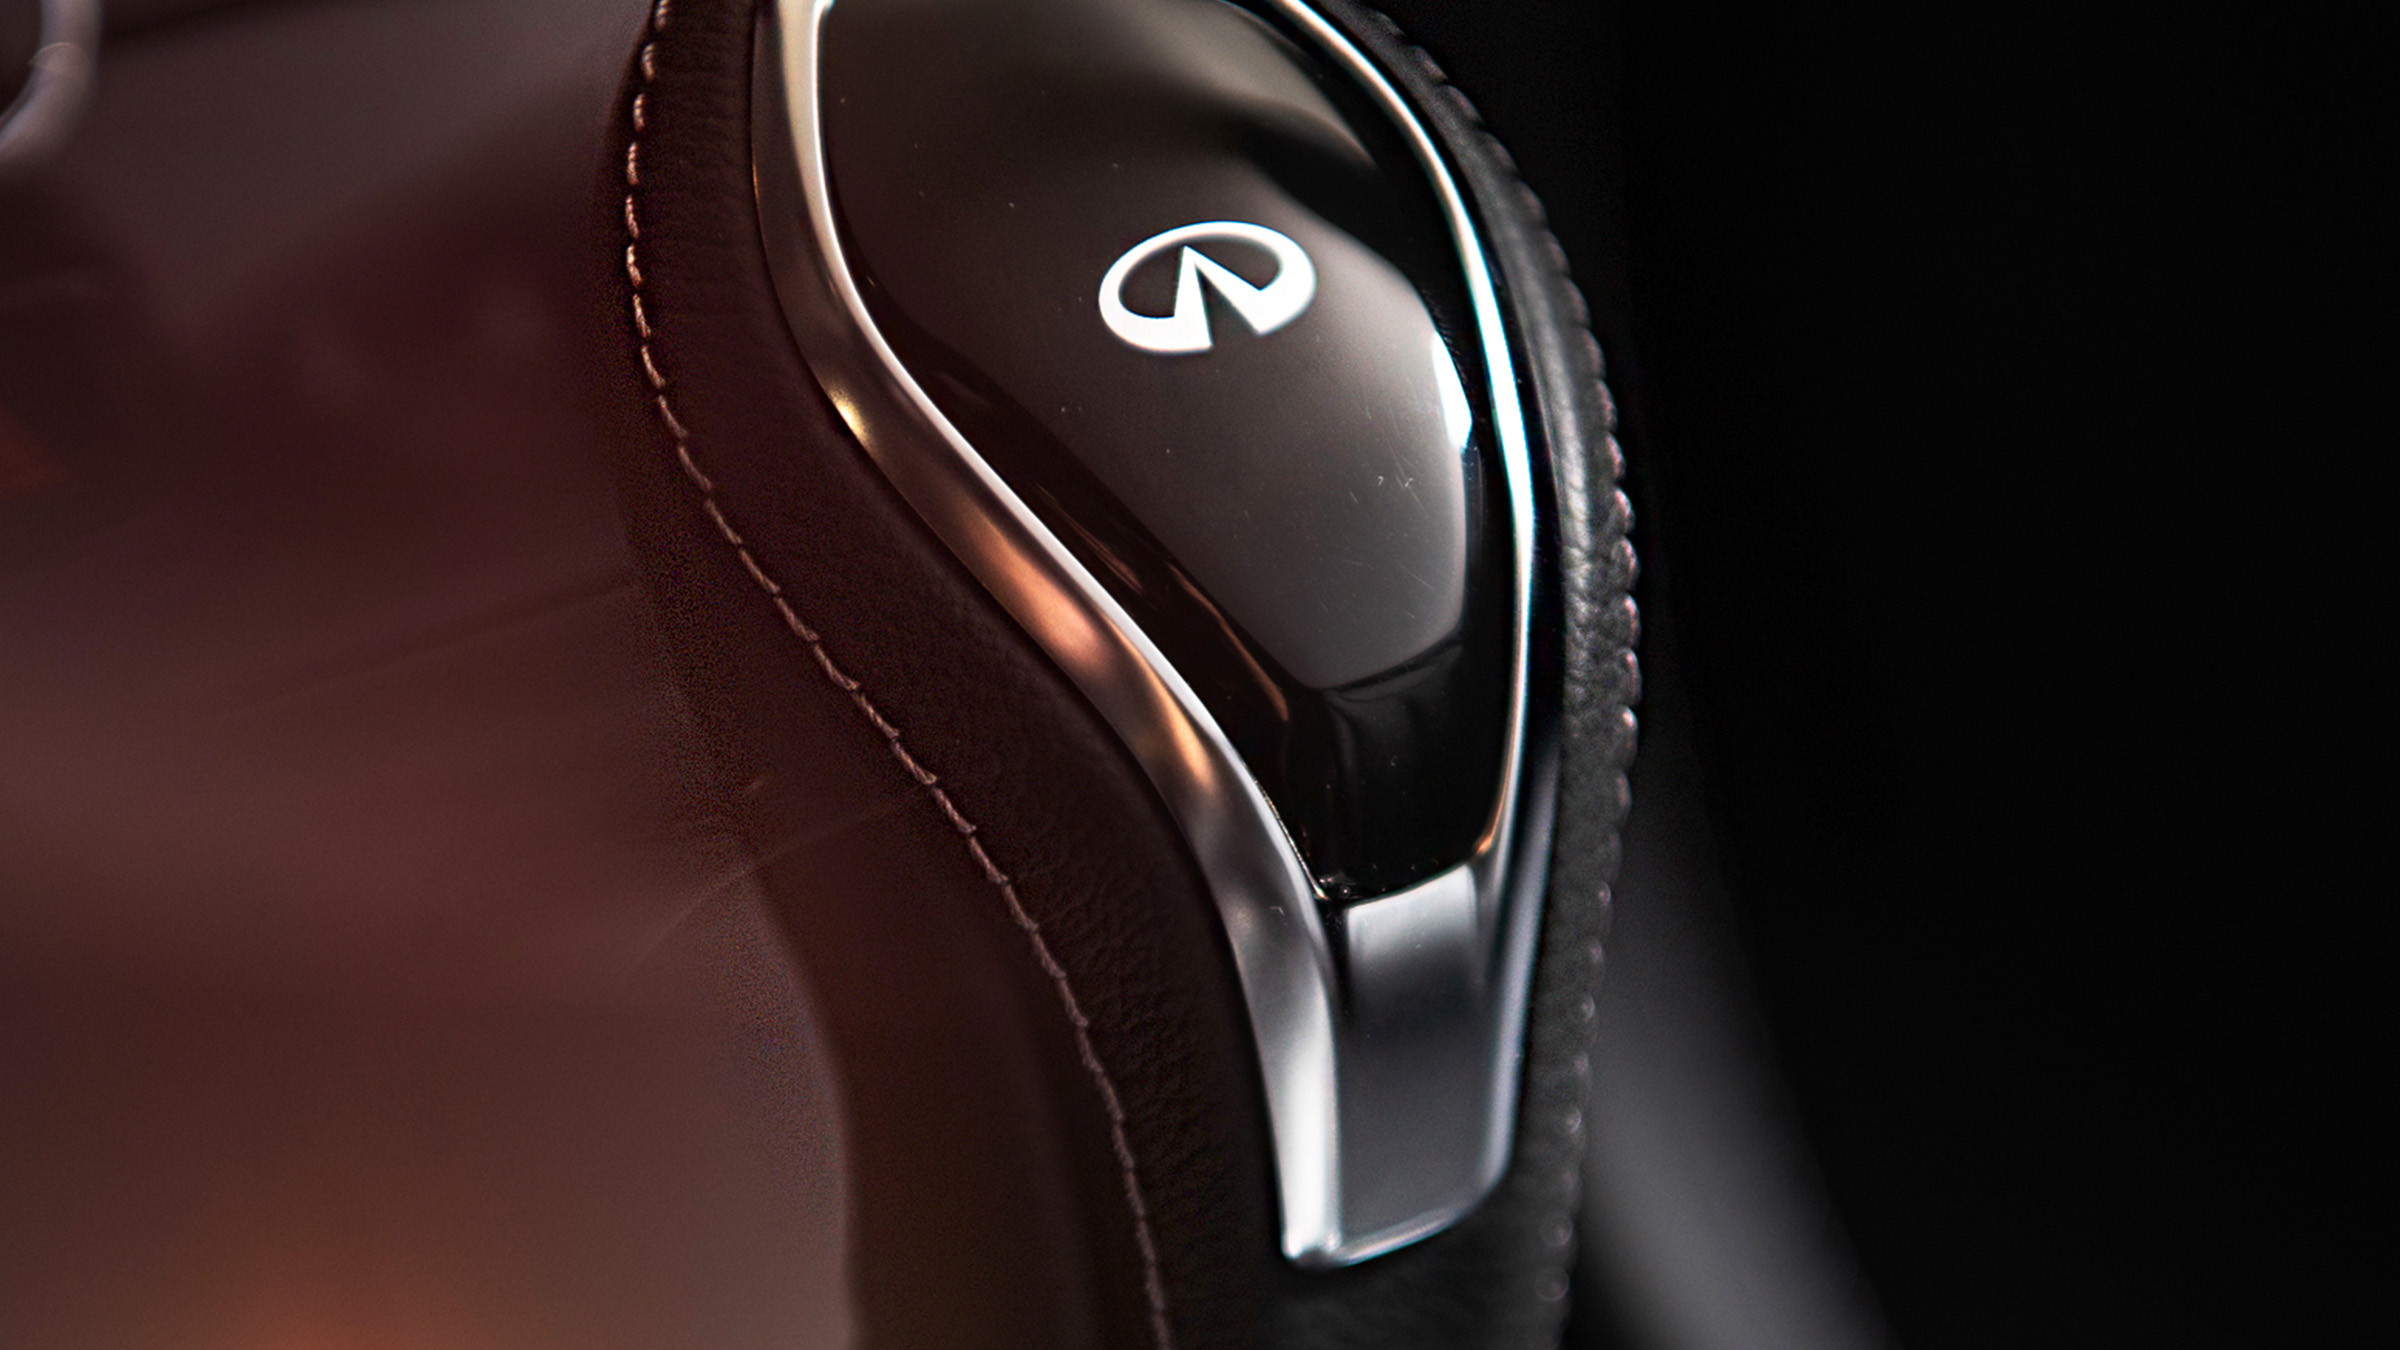 2022 INFINITI Q60 coupe leather covered gear stick.